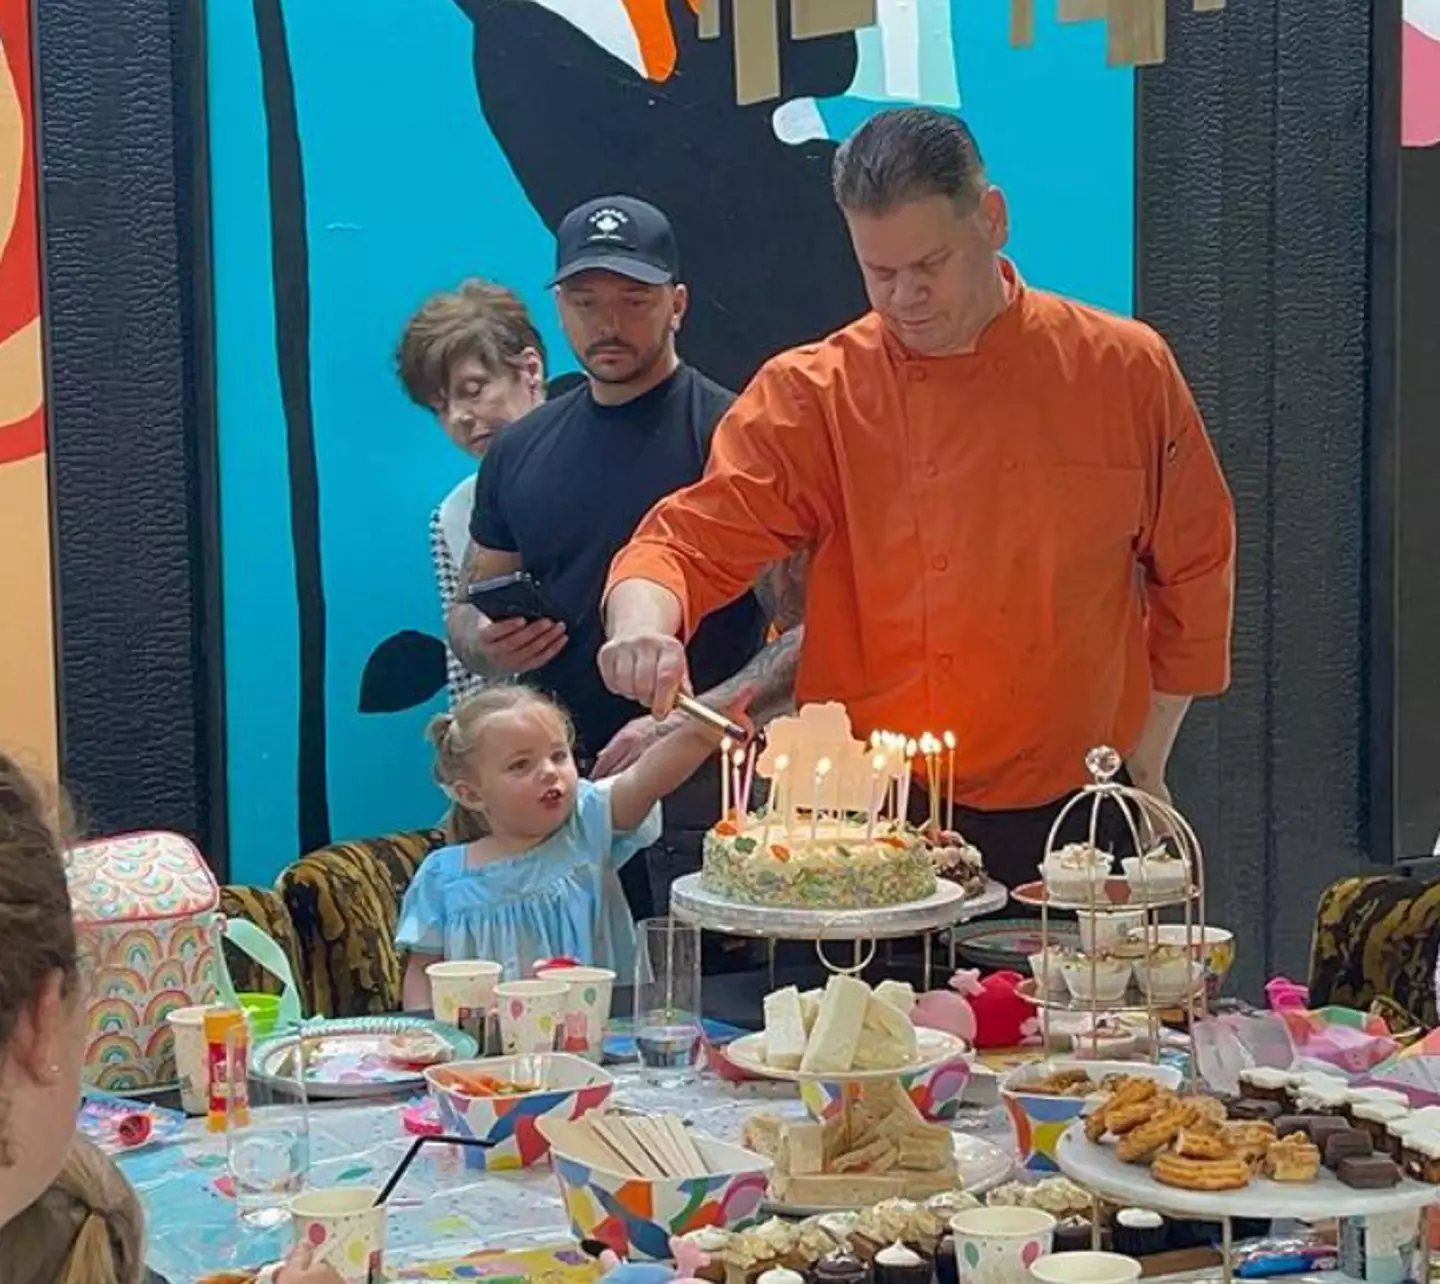 The three-year-old's birthday bash was Peppa Pig themed.